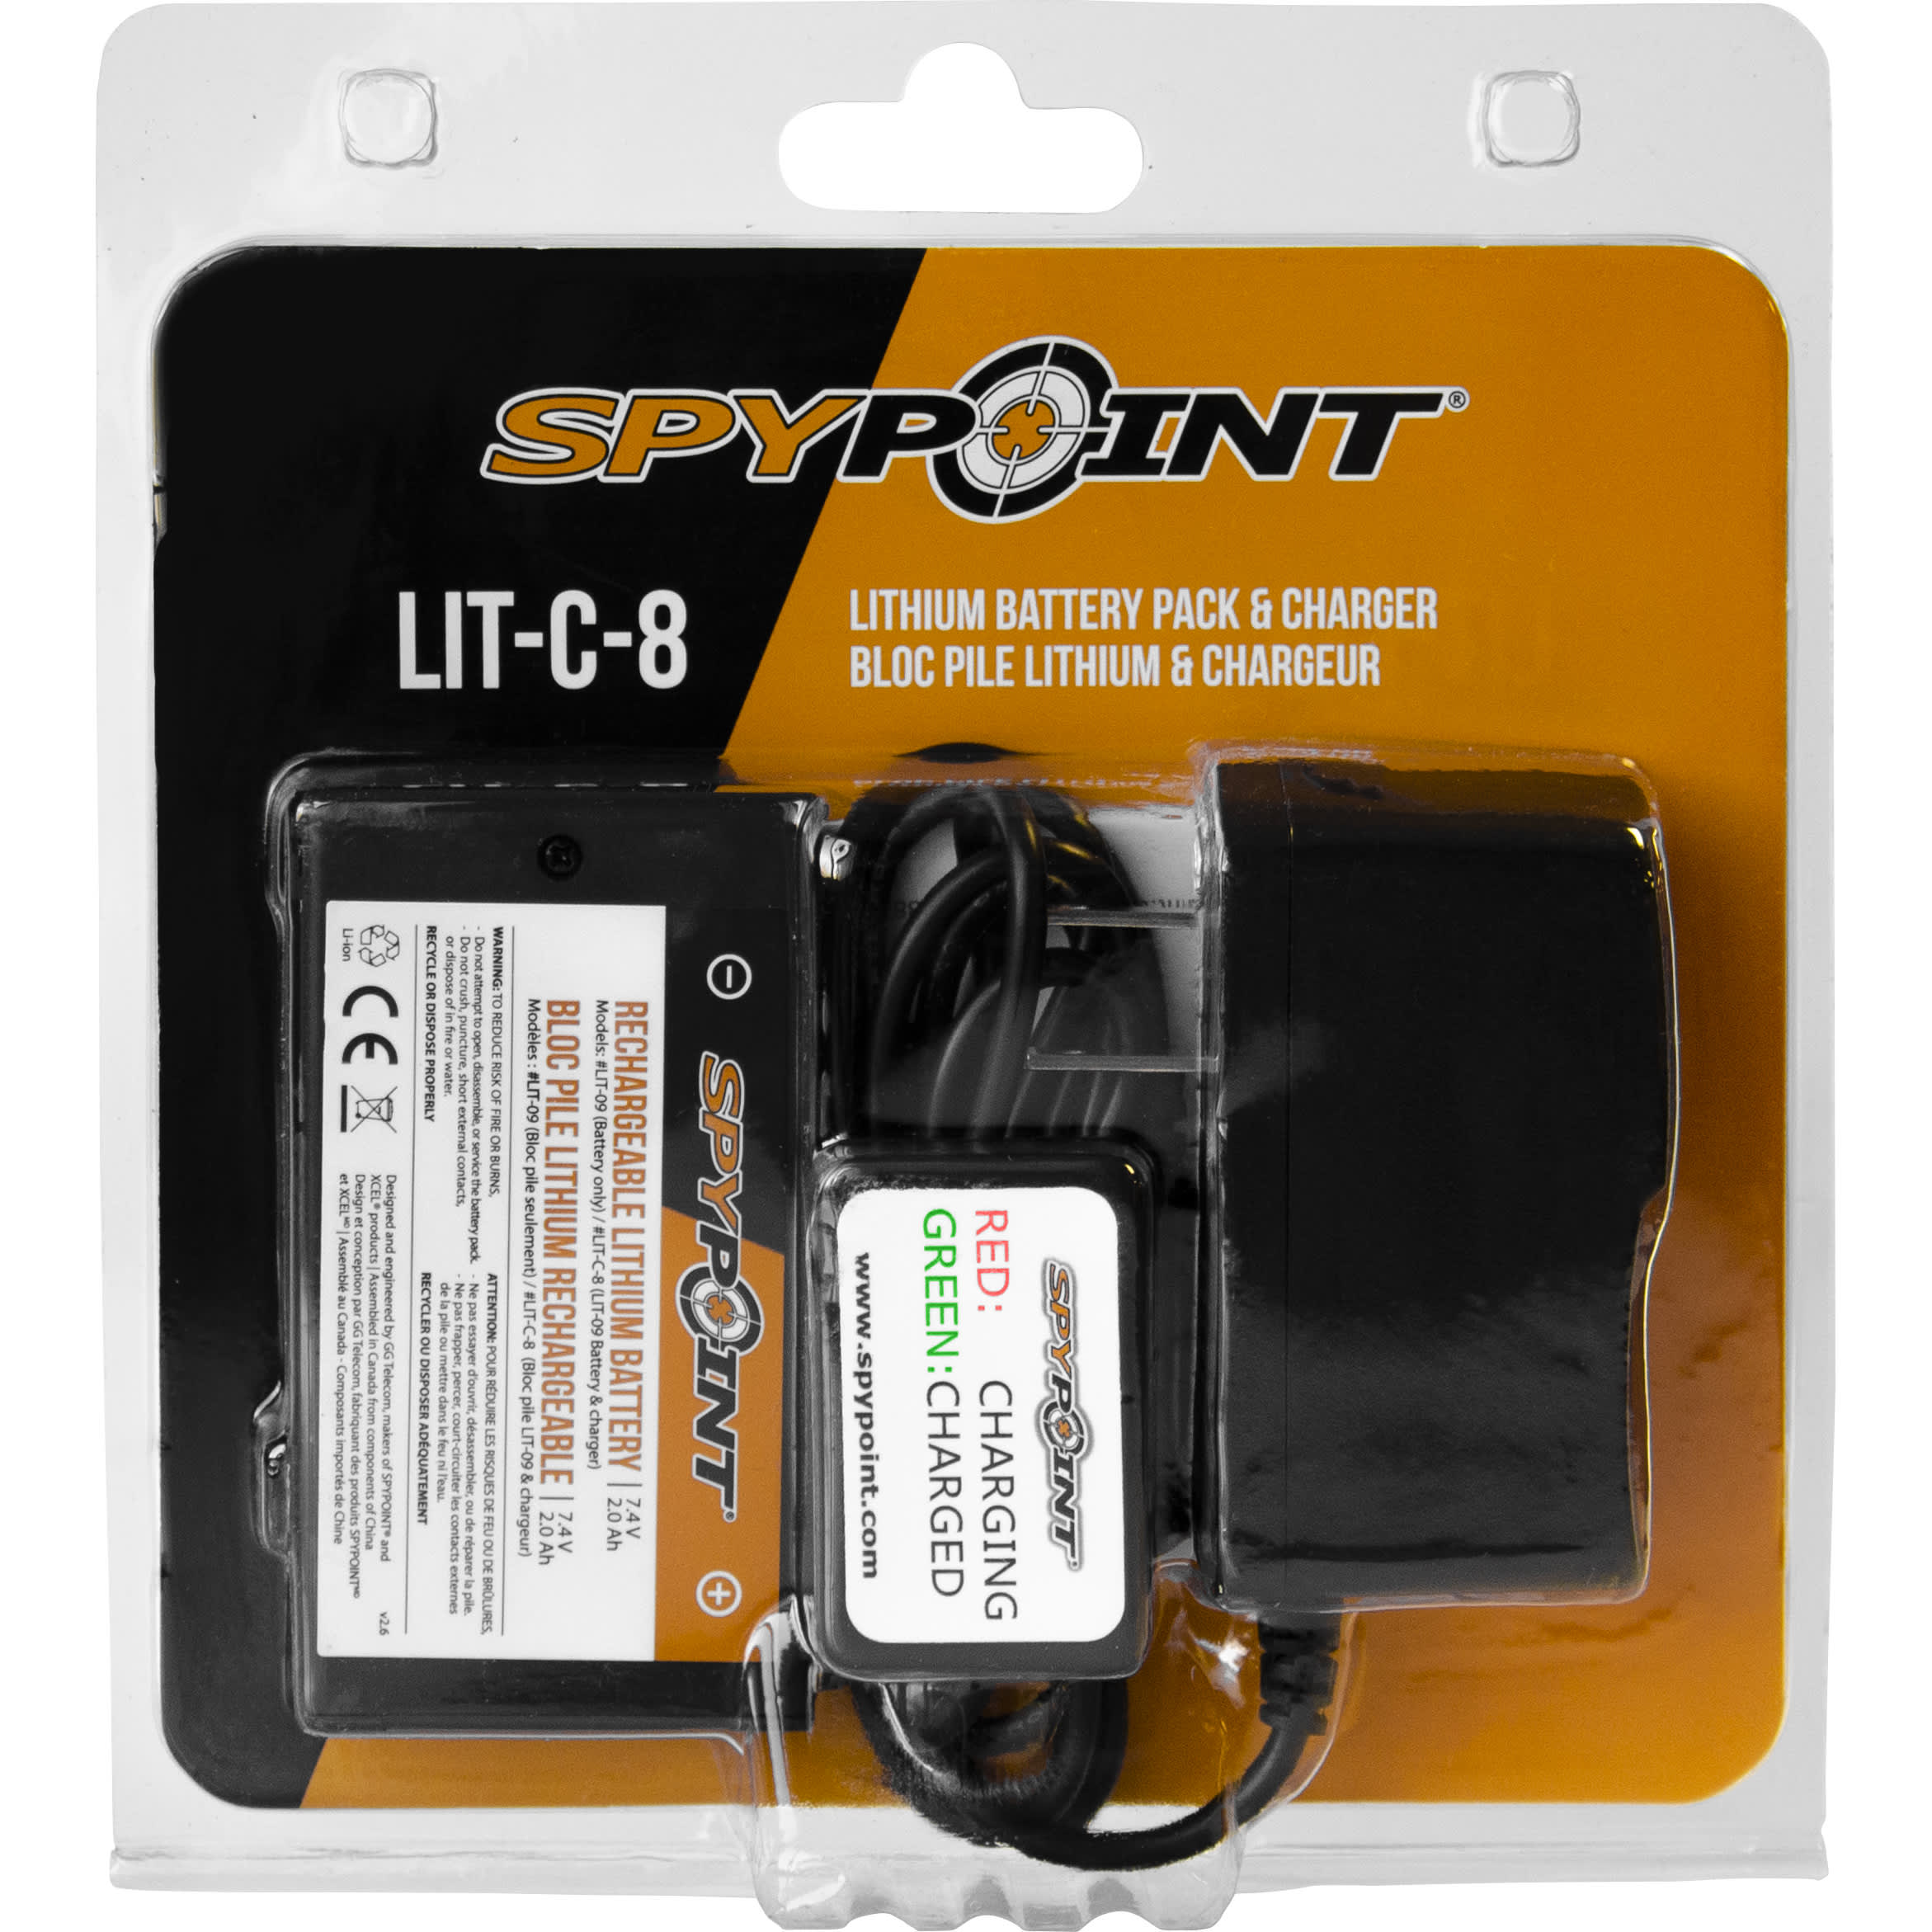 SPYPOINT® Rechargeable Lithium Battery Pack and Charger